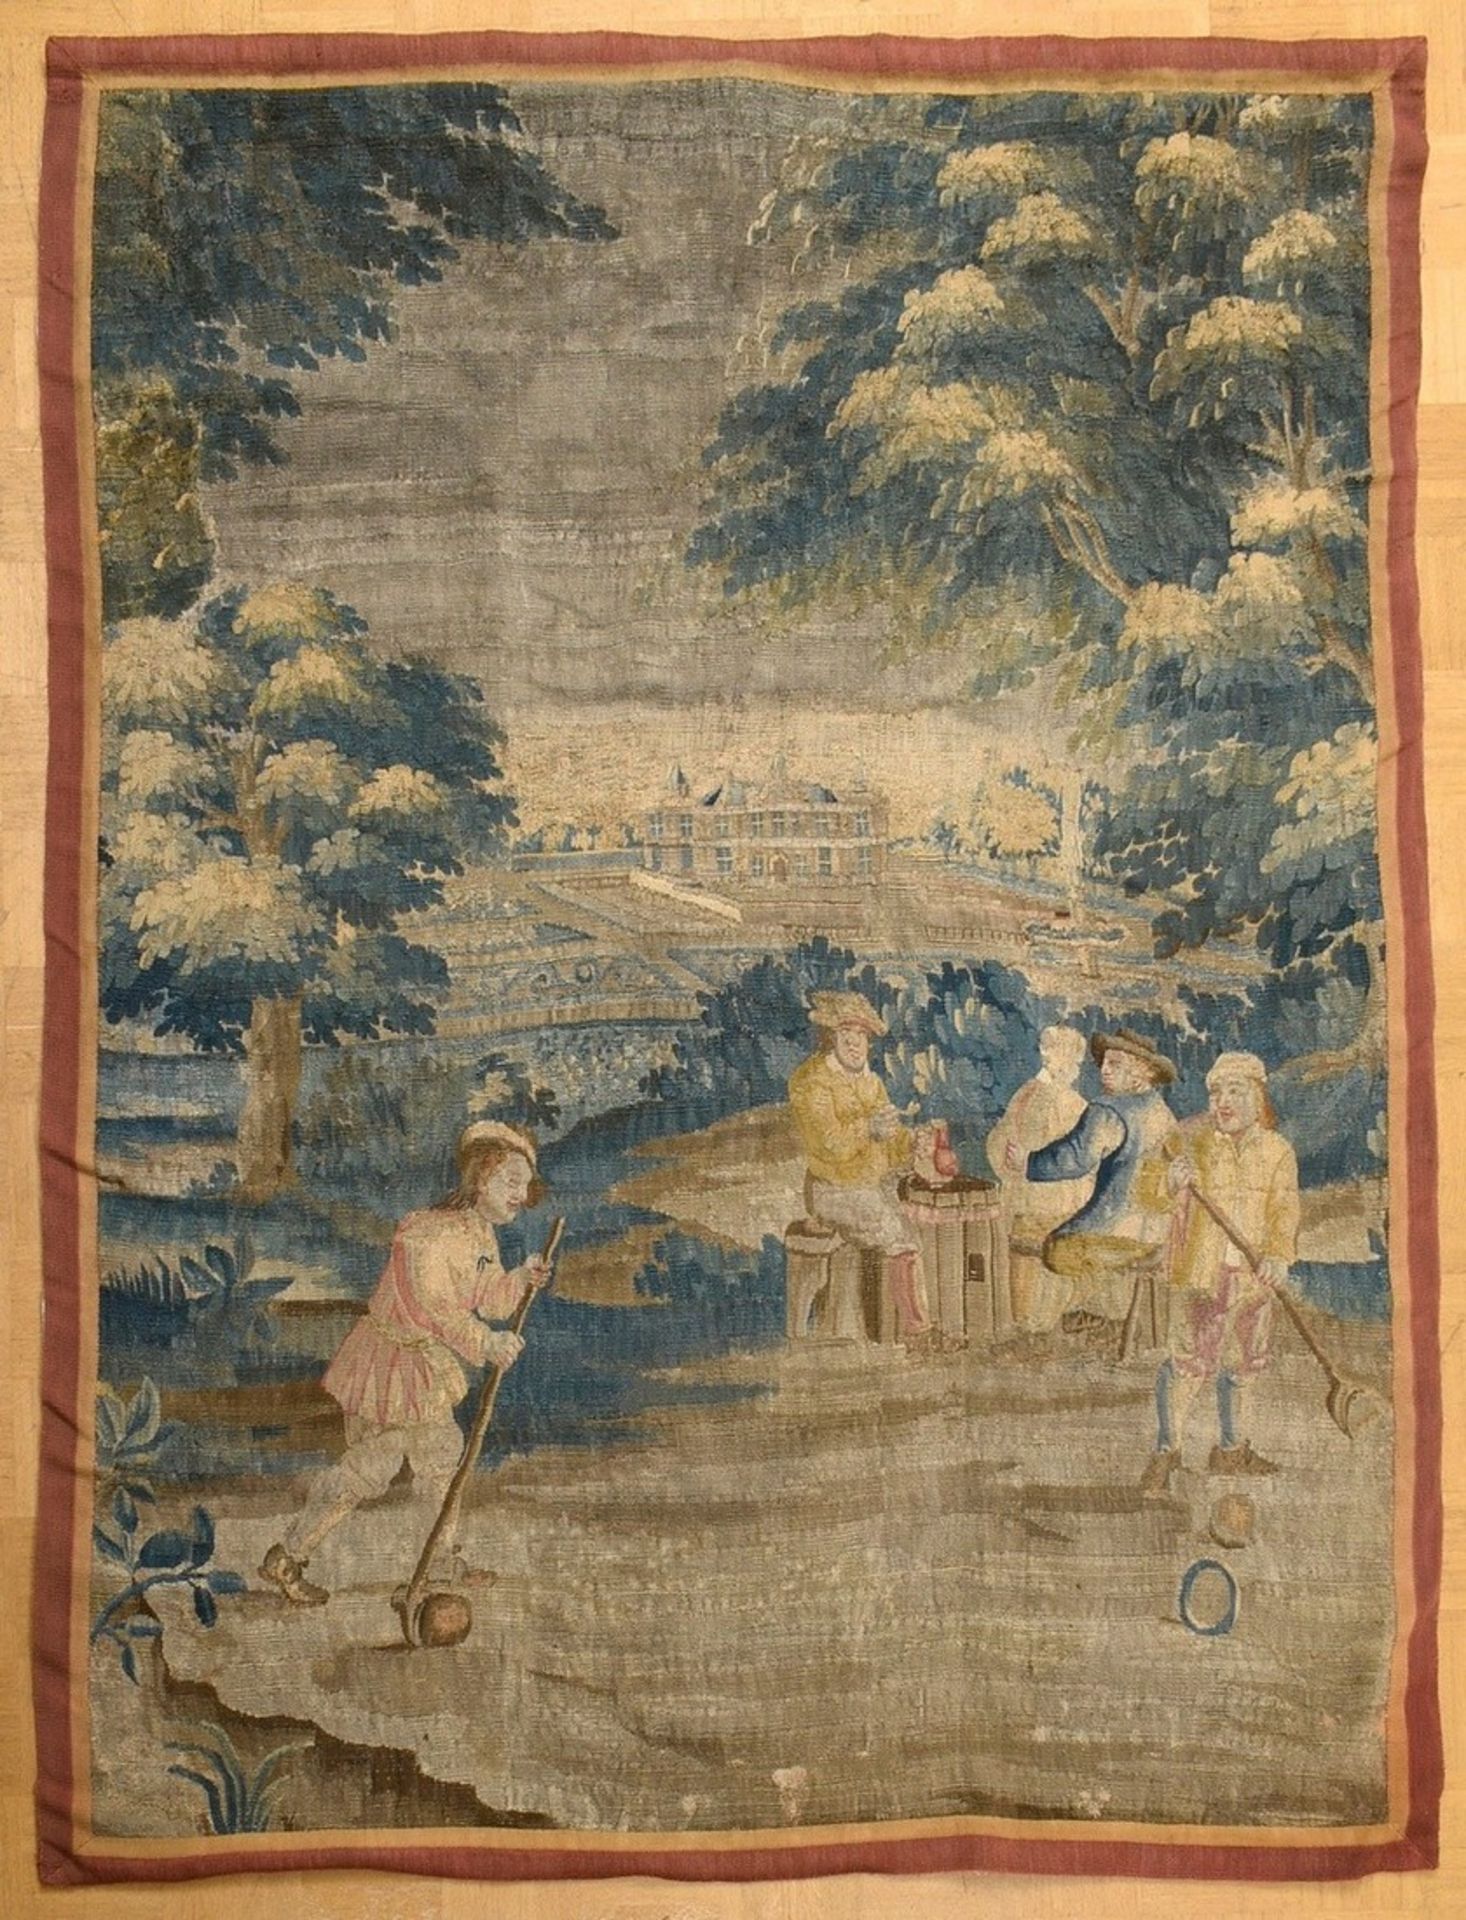 Antique tapestry "Paille Maille playing persons in front of castle architecture", wool/cotton, nort